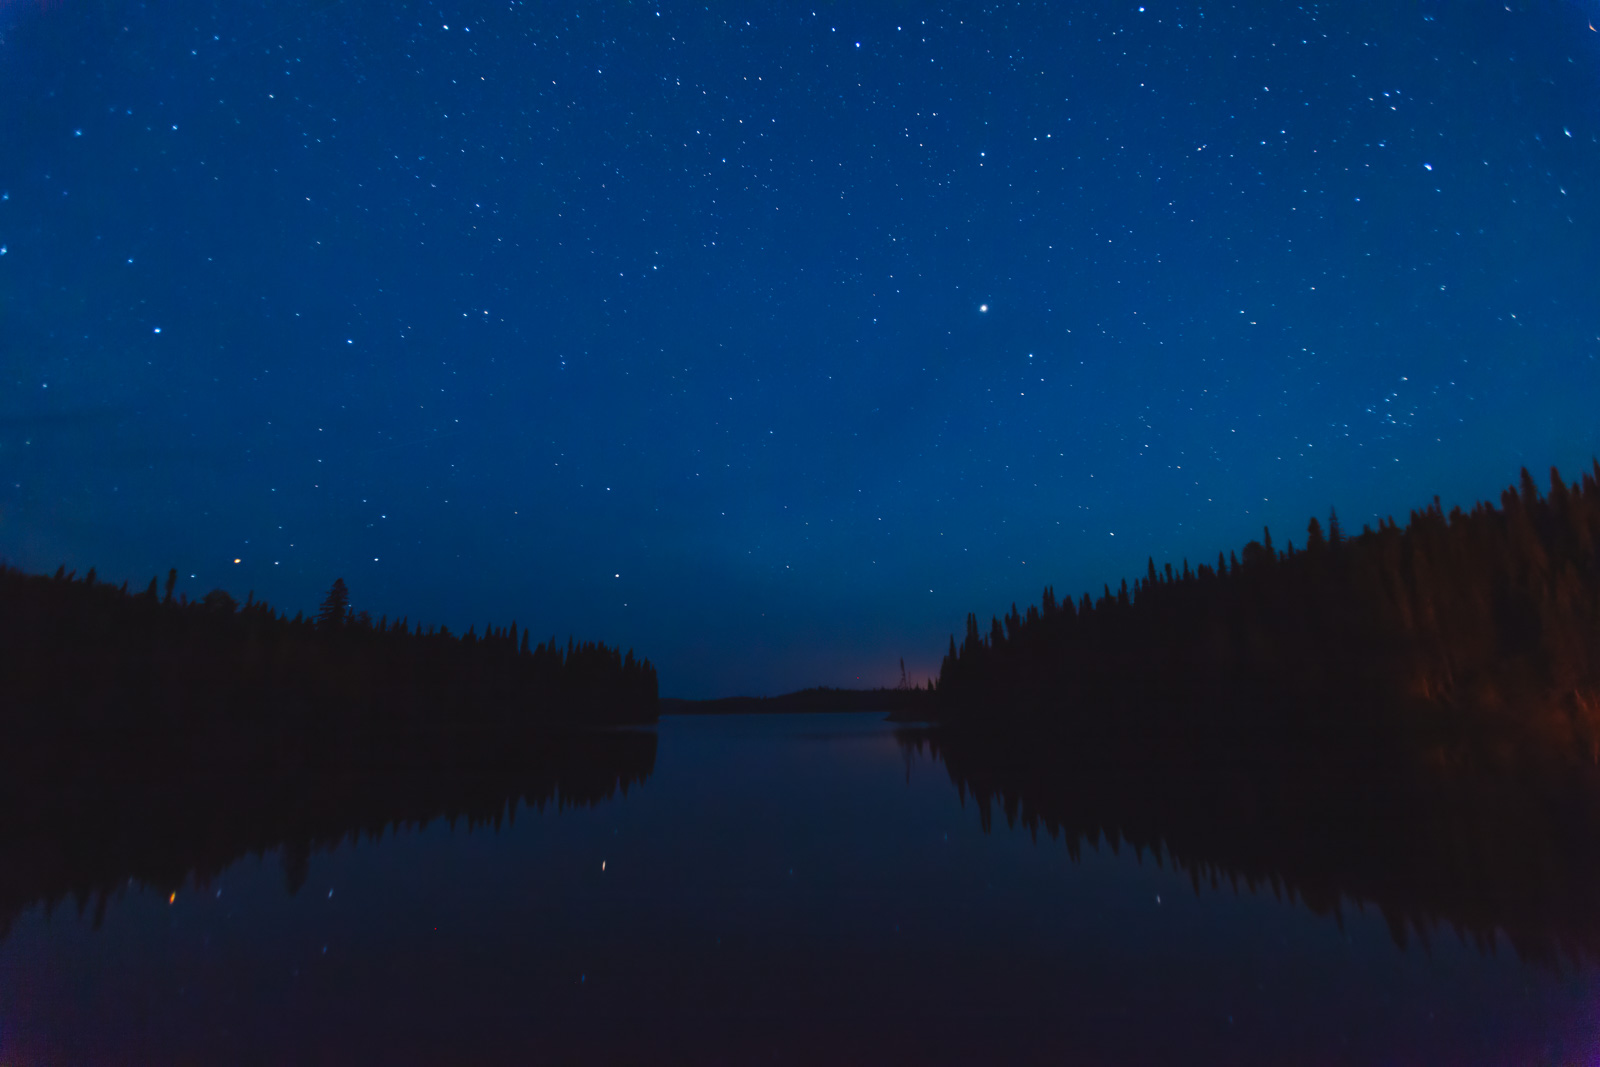 A remote location in Northern Ontario with no light pollution